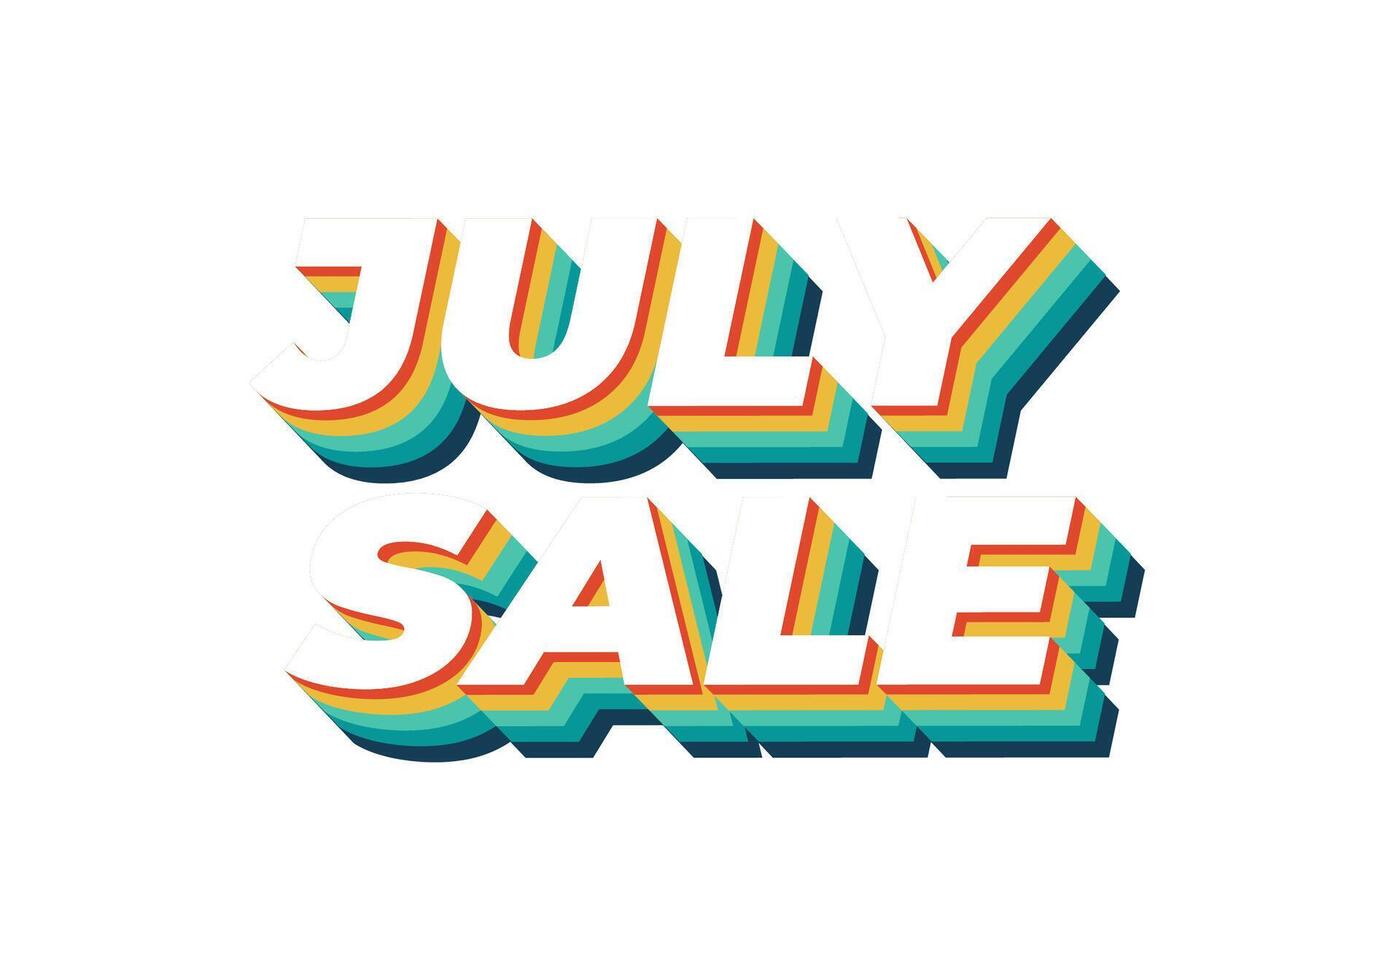 July sale. Text effect in 3 dimension style and eye catching colors vector